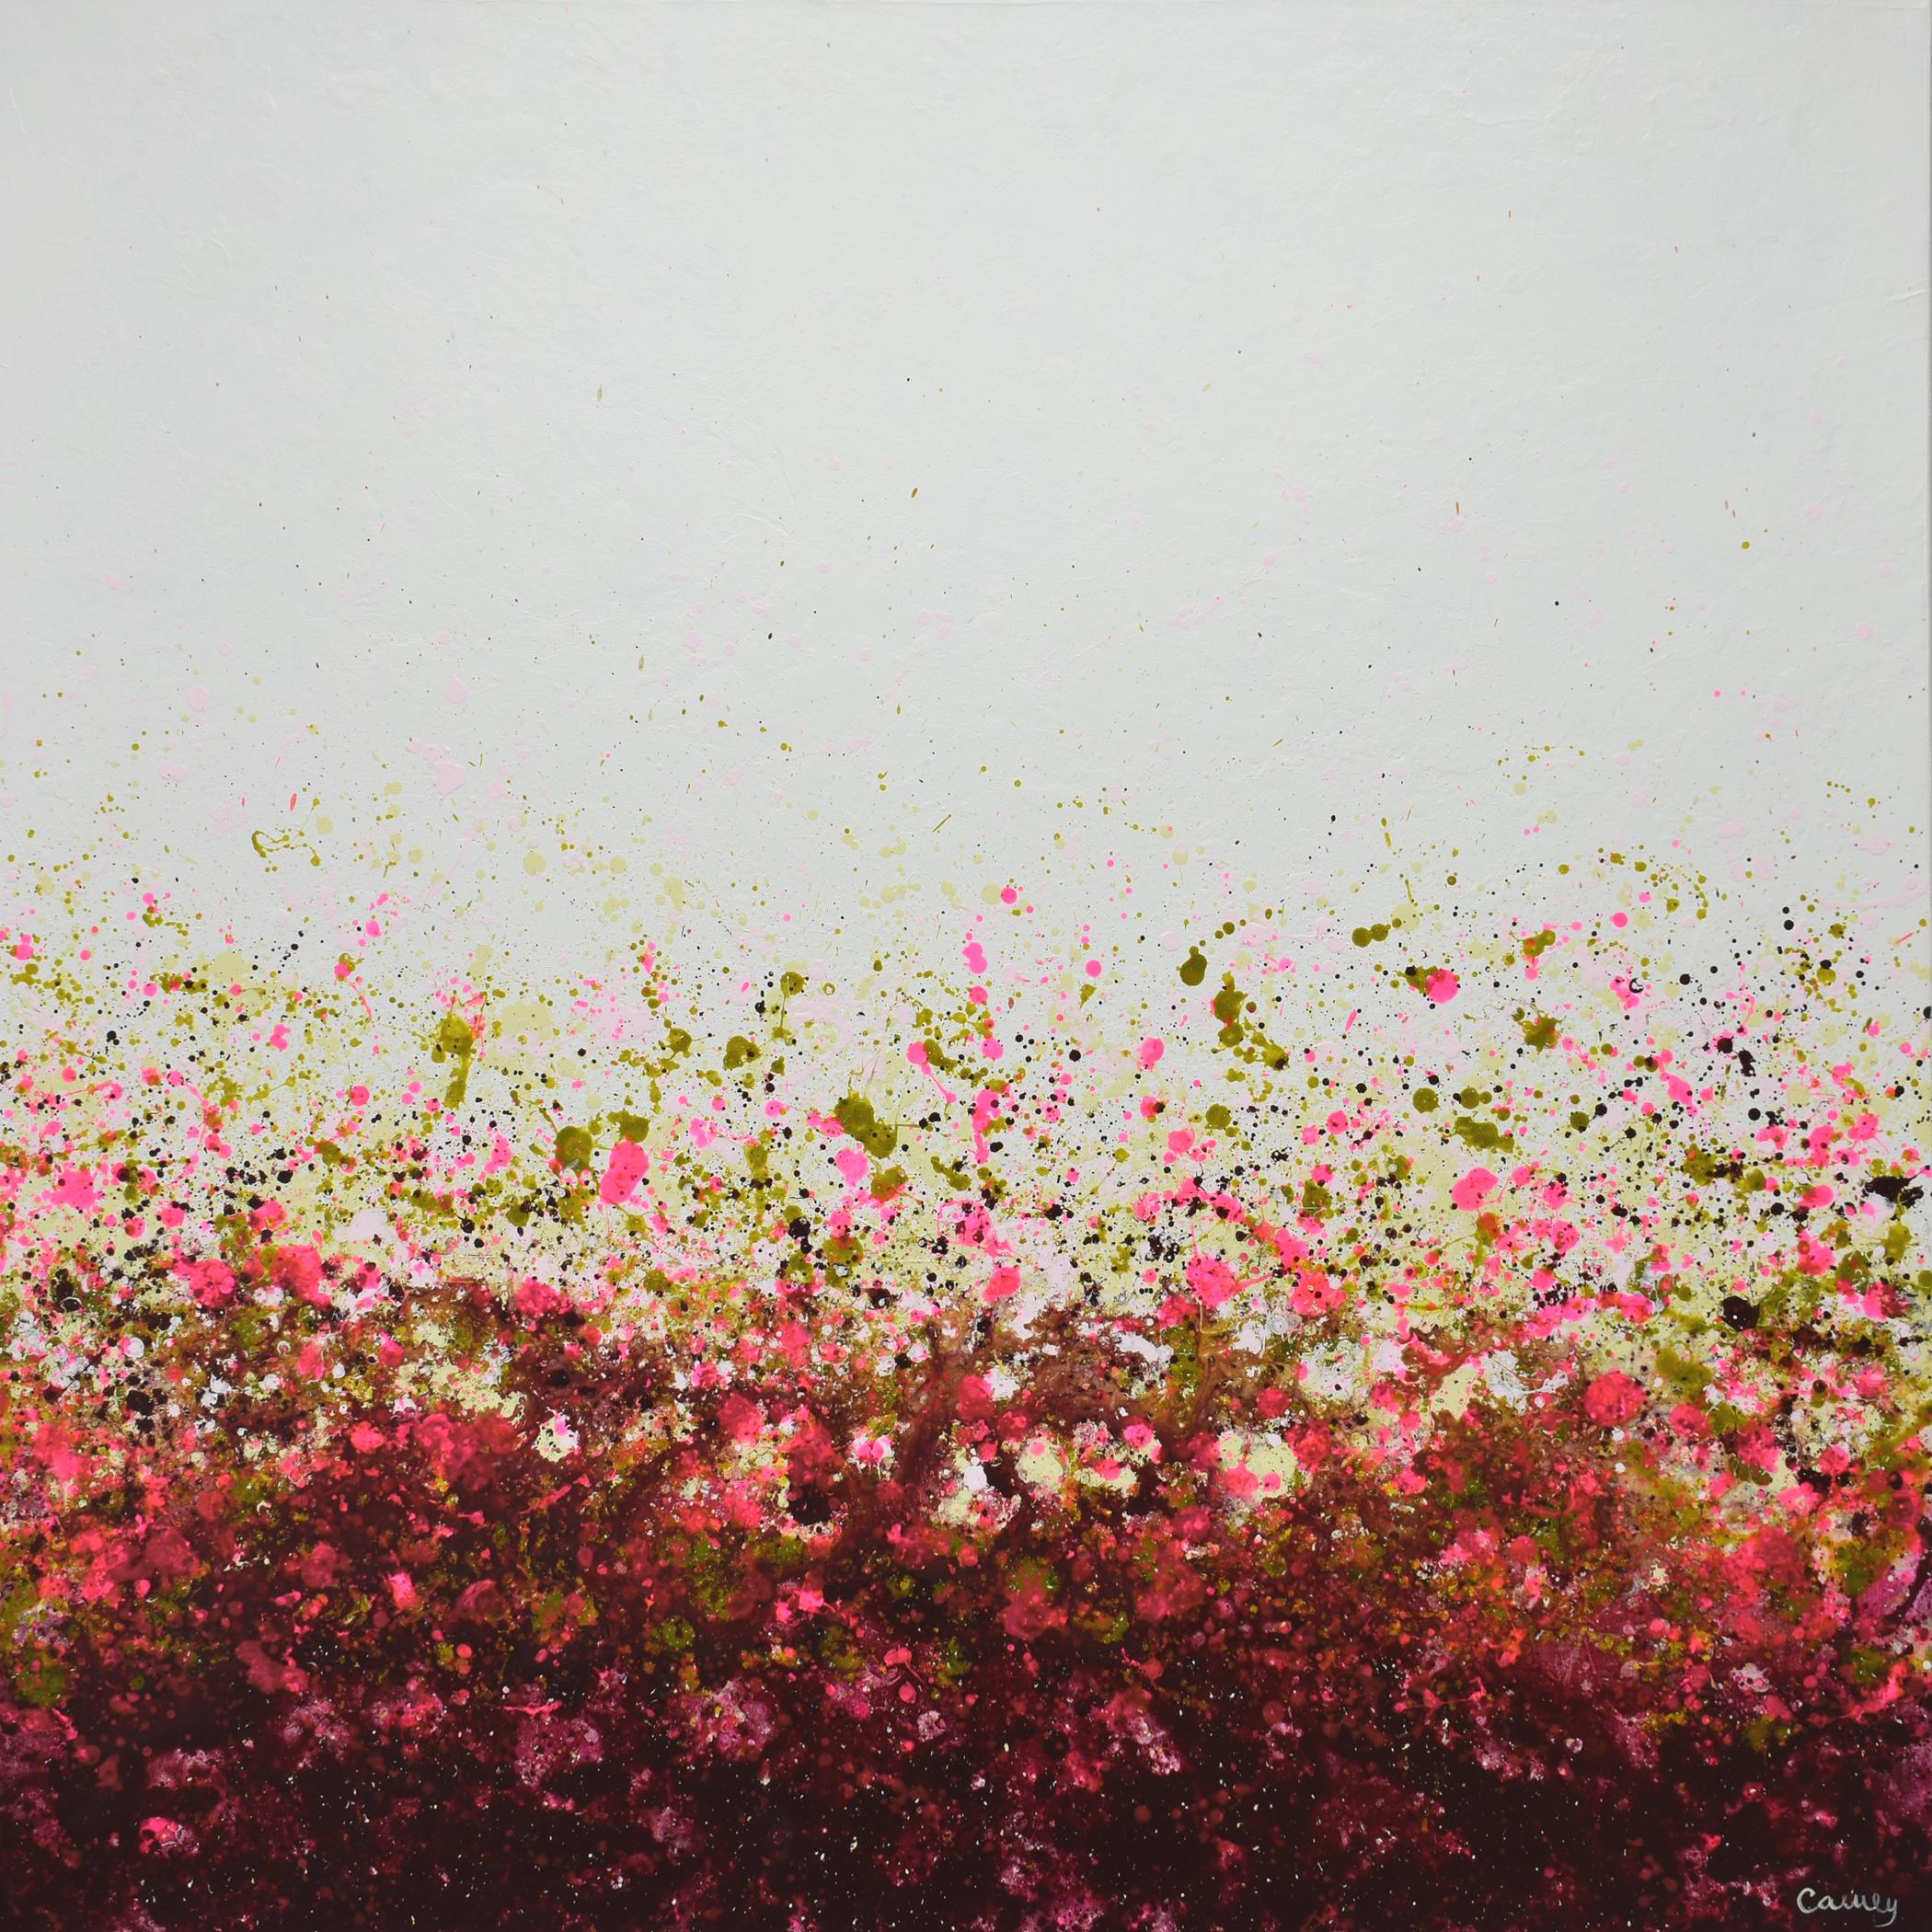 <p>Artist Comments<br />This painting is part of Lisa Carney's signature GeoFlora series, a collection of abstracted botanical paintings where she uses drip and splash techniques to suggest plant life, like wildflower fields and sea corals. The work